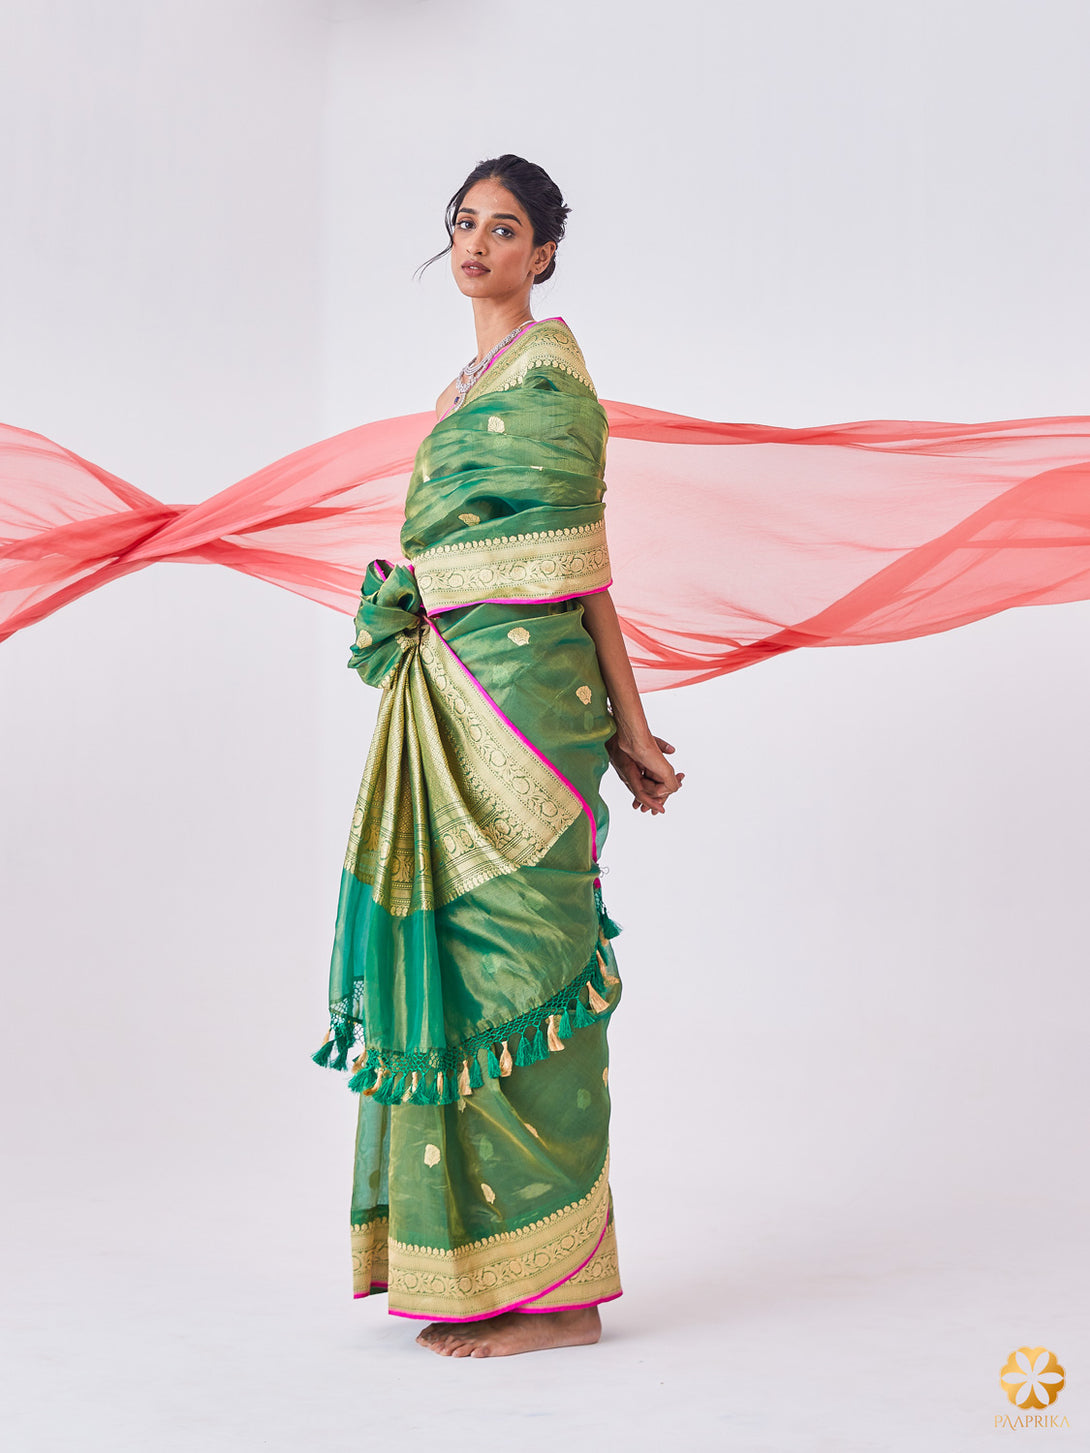 Elegant Drape of Exquisite Handwoven Tissue Saree - Richness and Opulence in Every Fold.